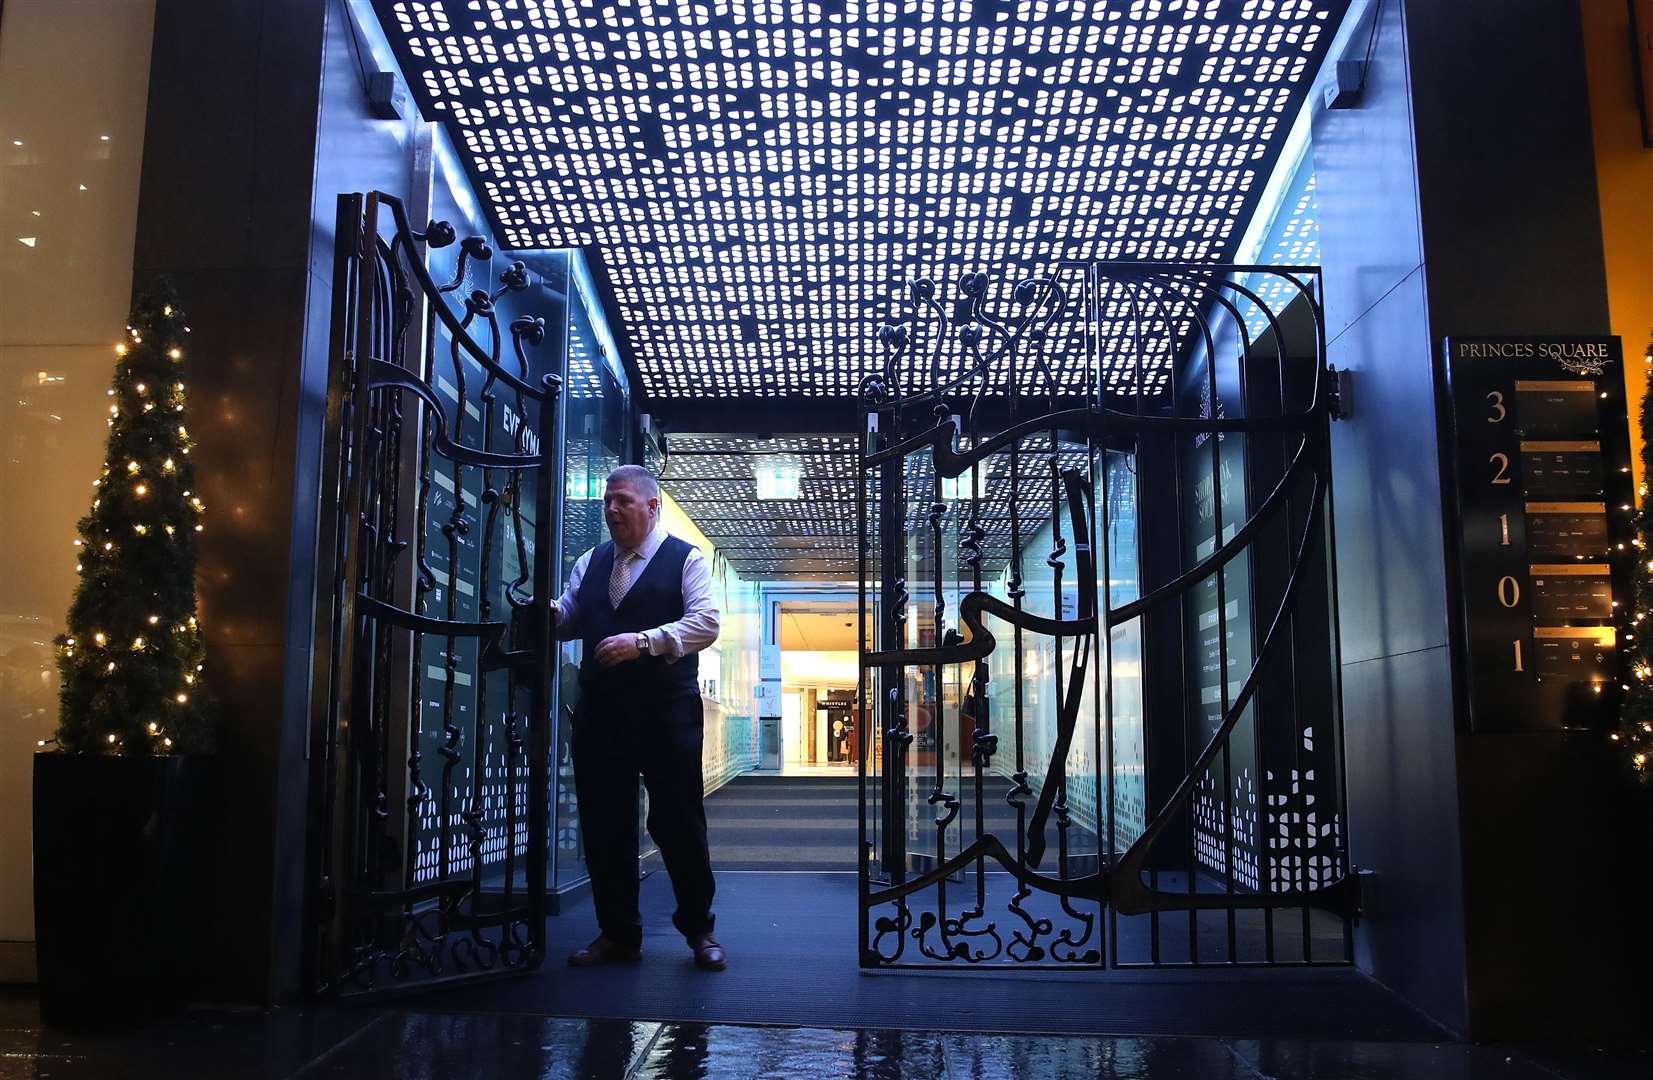 The gates to Princess Square Shopping Centre in Glasgow are closed as new restrictions come into force (Andrew Milligan/PA)